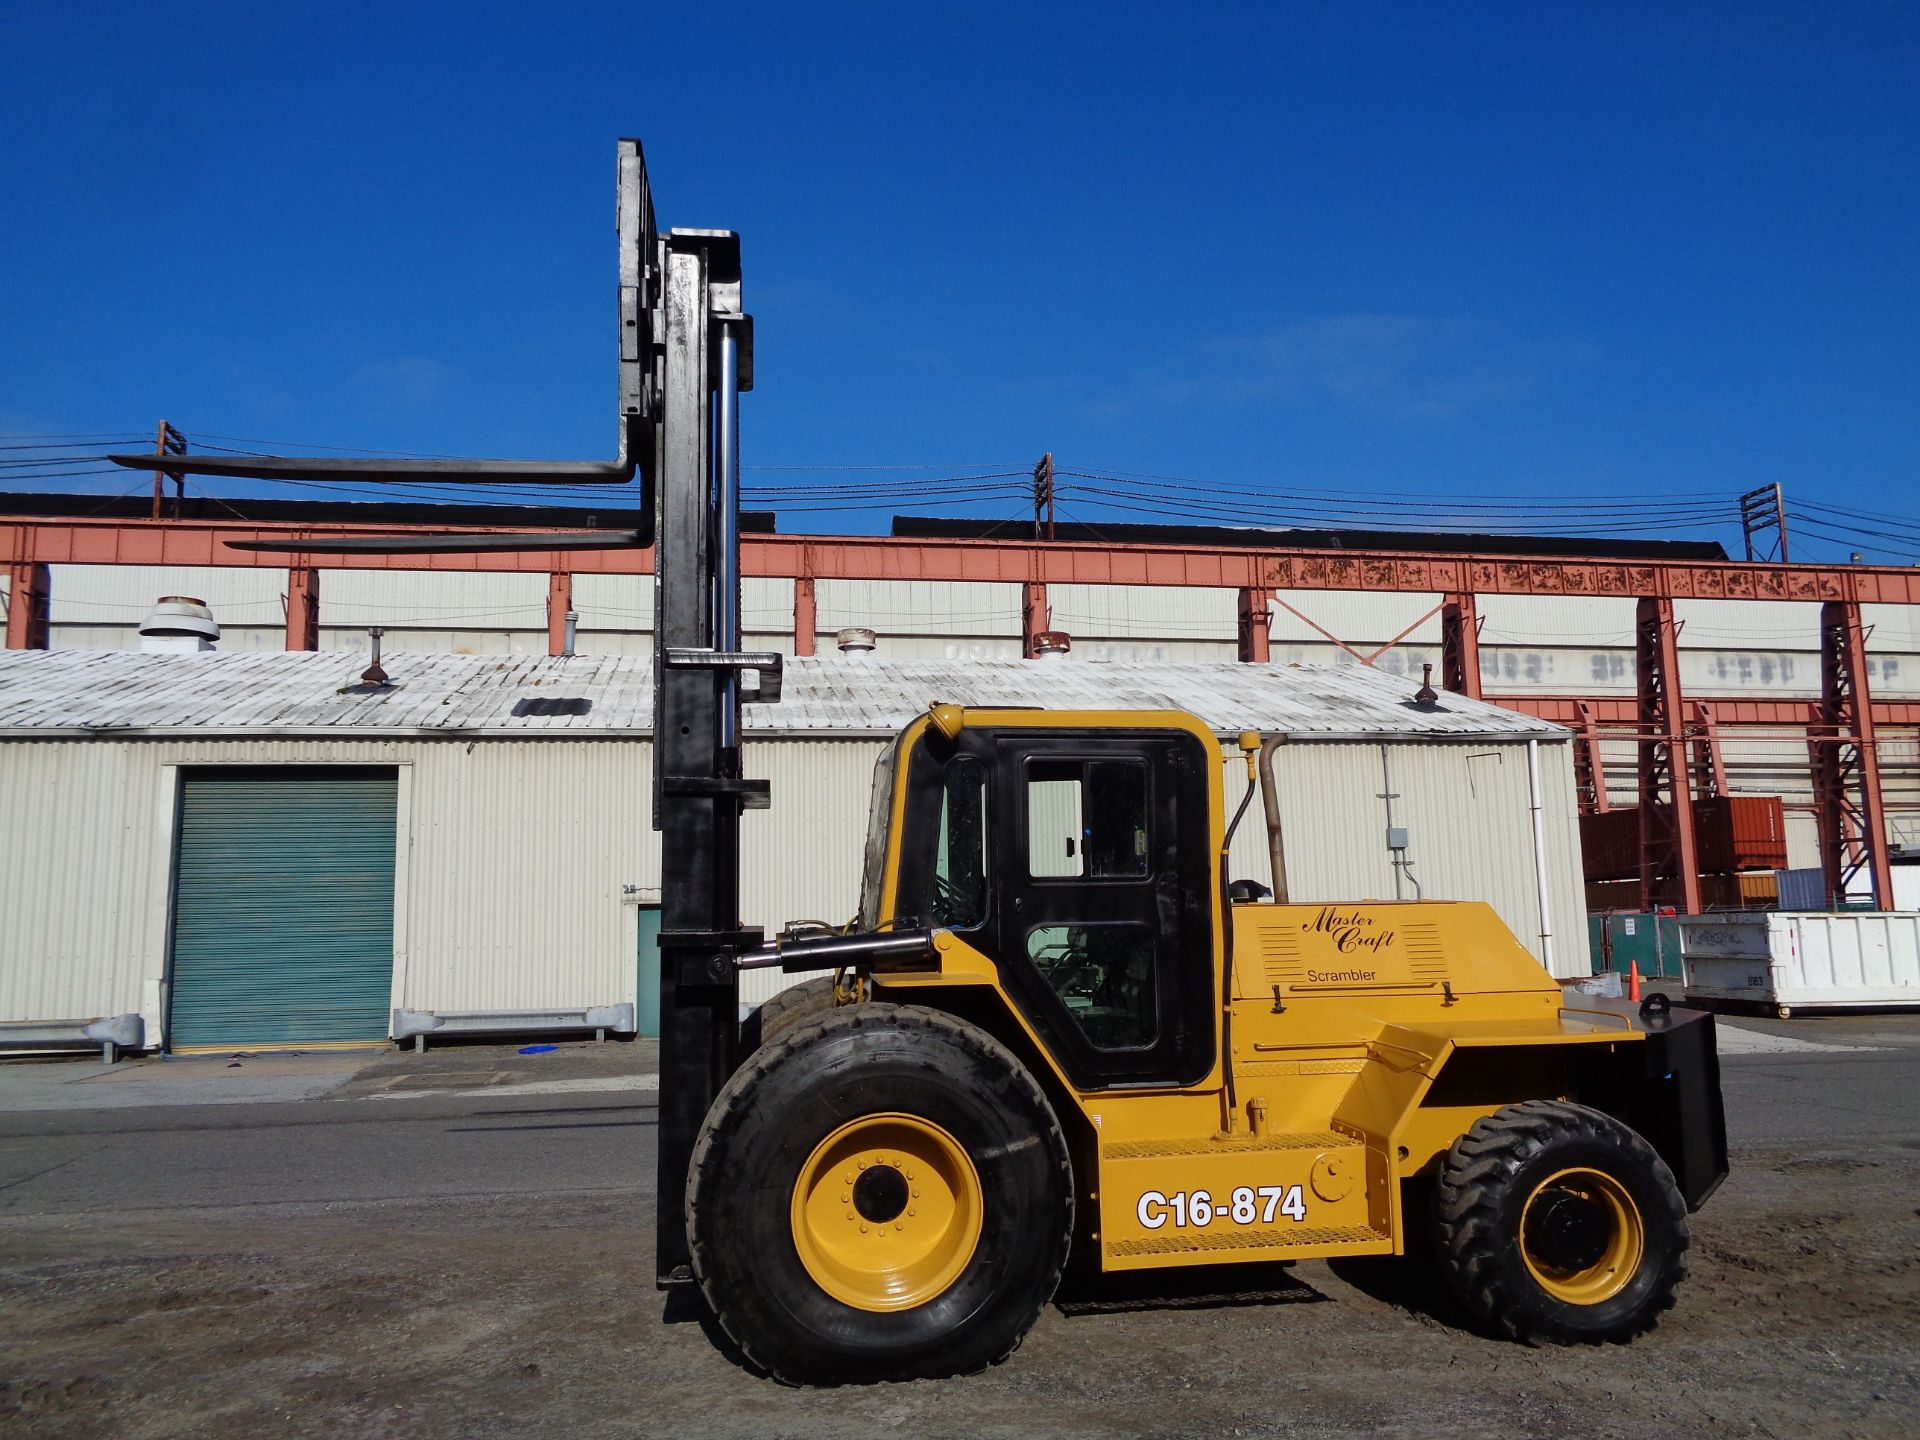 2008 Master Craft C16.874 16,000 lbs Rough Terrain 4x4 Forklift - Image 3 of 12